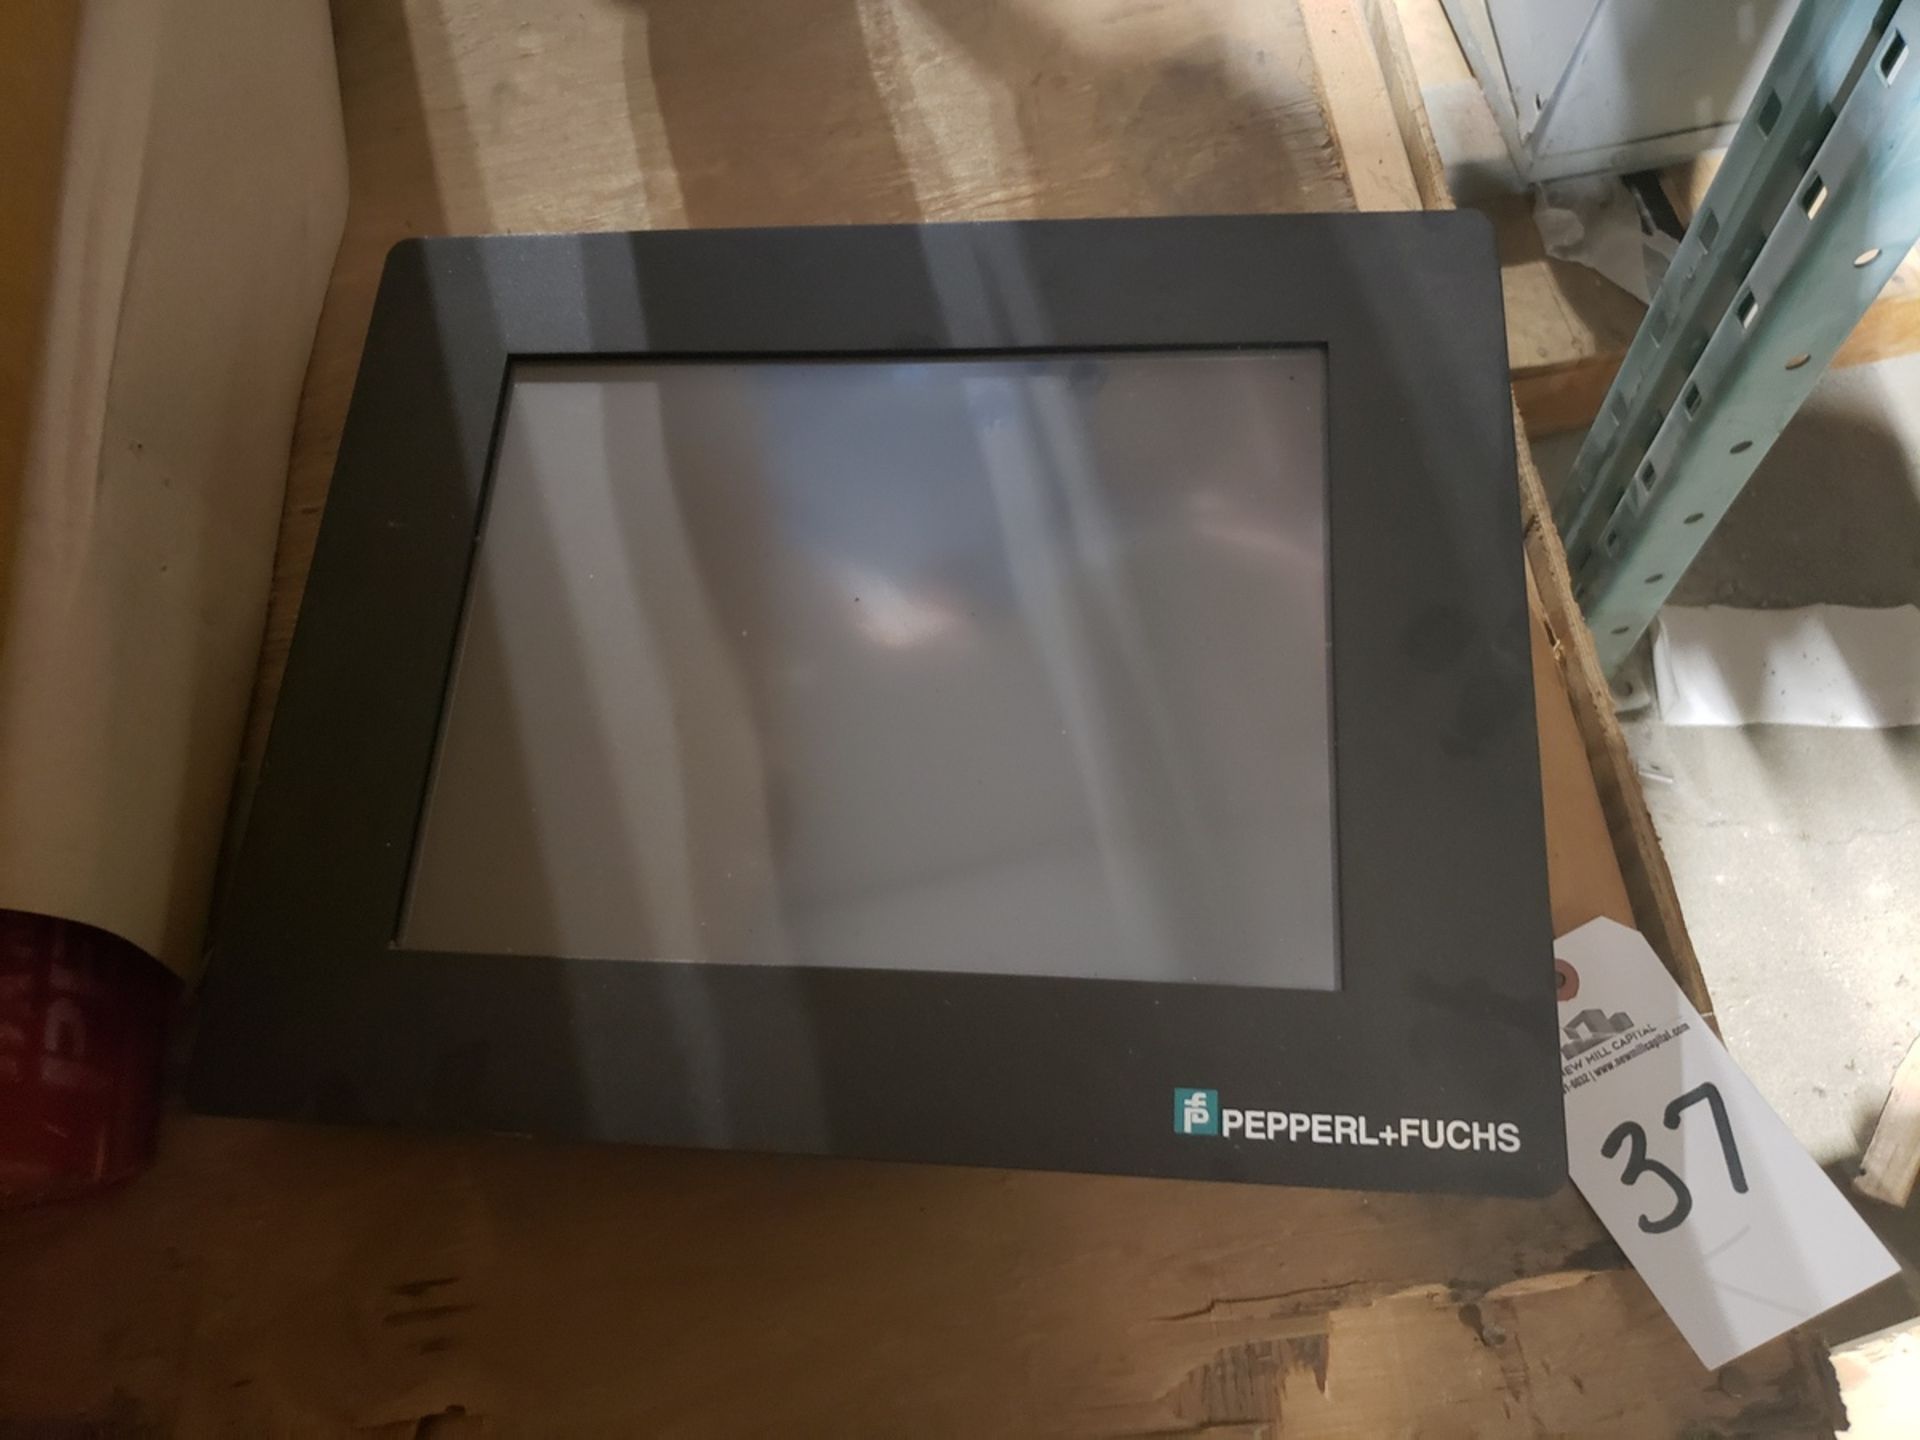 Pepperl+Fuchs Touch Screen Panel | Reqd Rig: No Cost